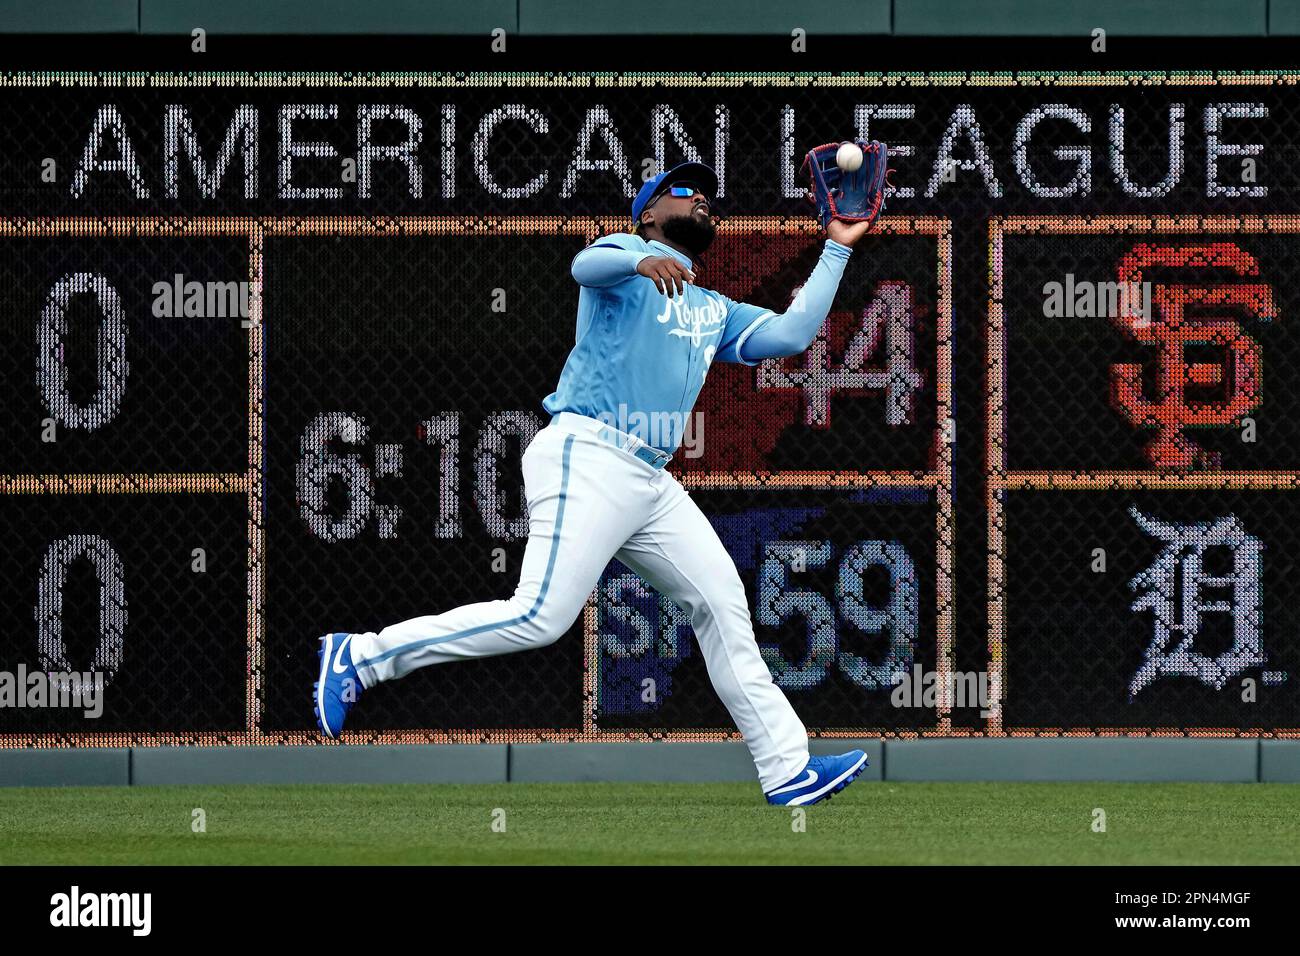 Kansas City Royals left fielder Franmil Reyes catches a fly ball